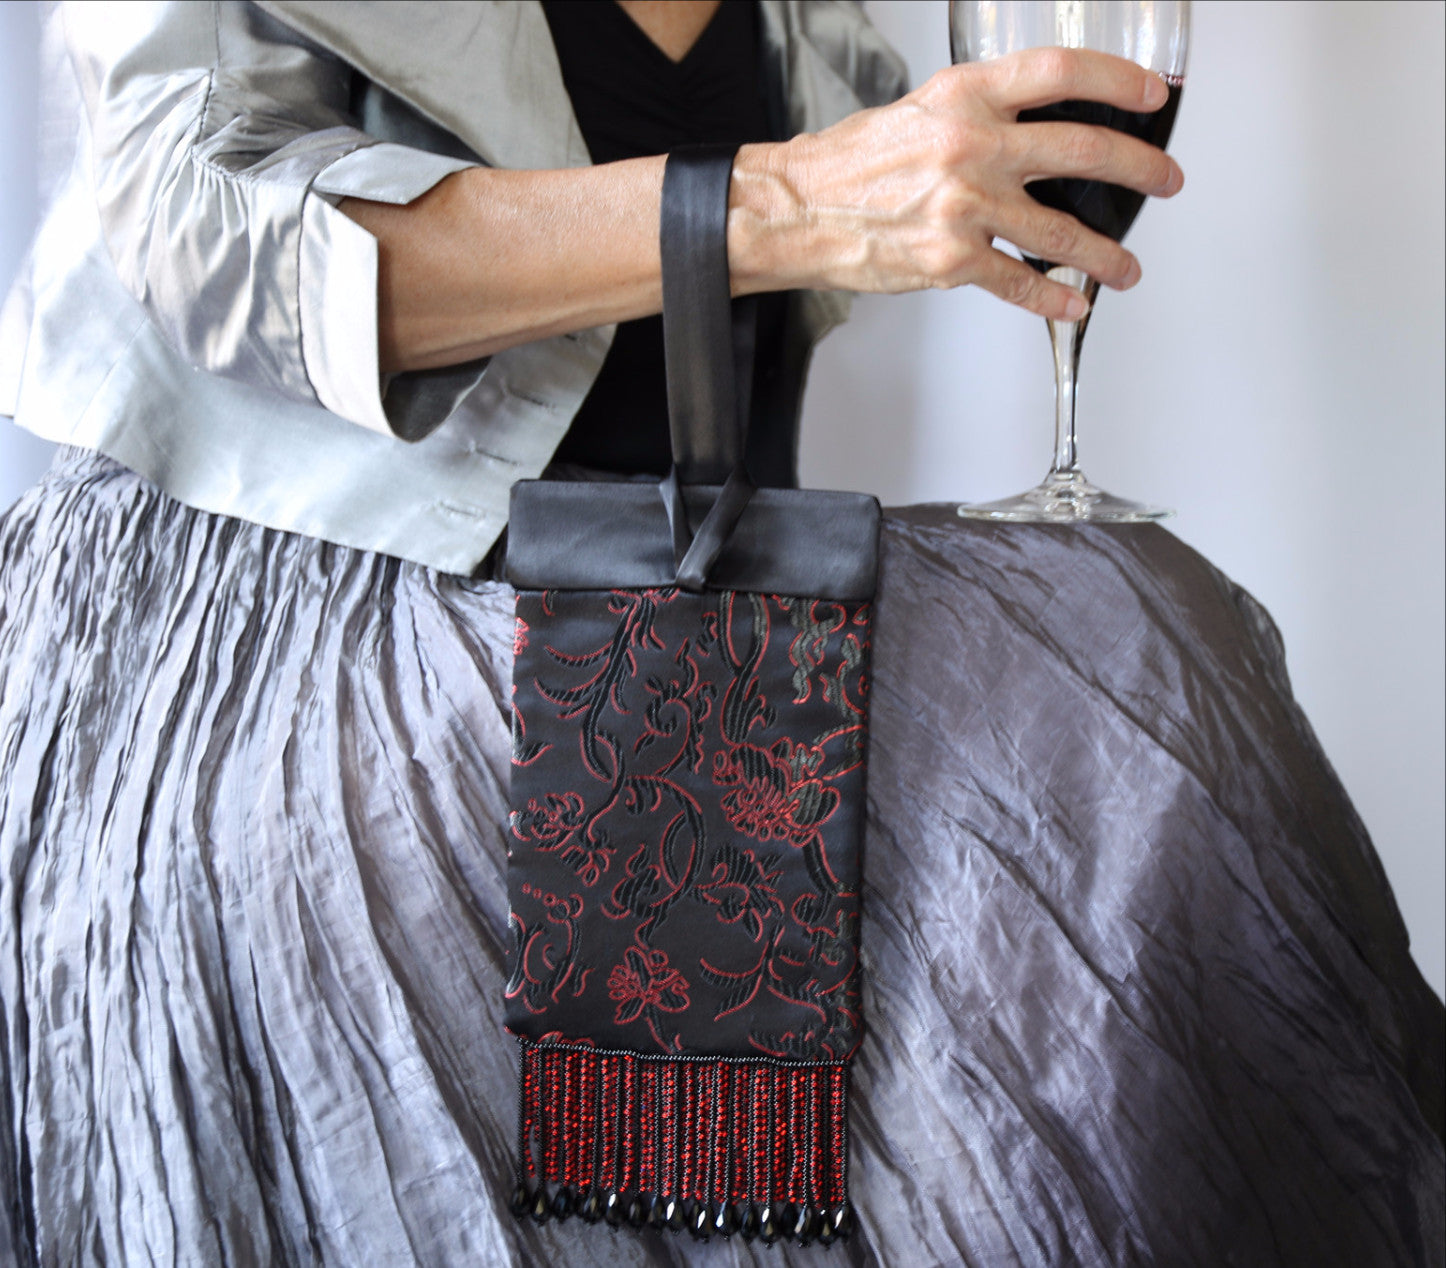 Black and Red Evening Bag from Jenny Jag-Wear Design. Photo shows the functionality of this compact evening bag. The model is wearing the purse on her wrist and holding a glass of wine in the same hand. The Zara Collection from Jenny Jag-Wear Design.